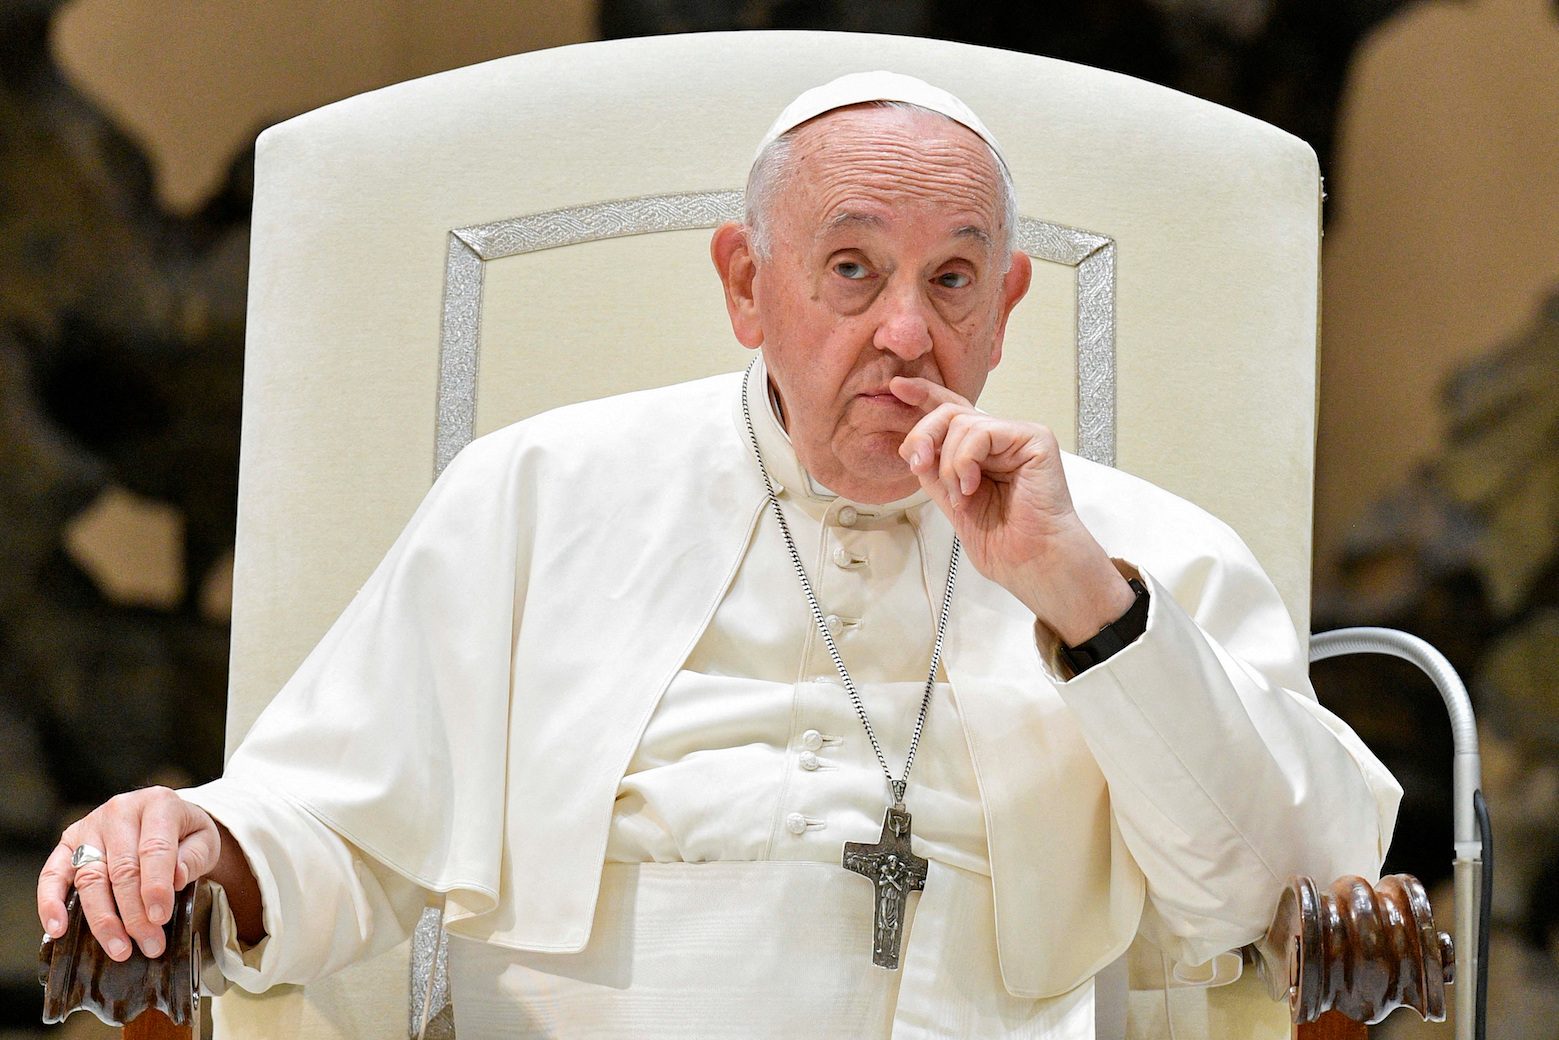 Pope Francis has scan due to flu, lung complications ruled out